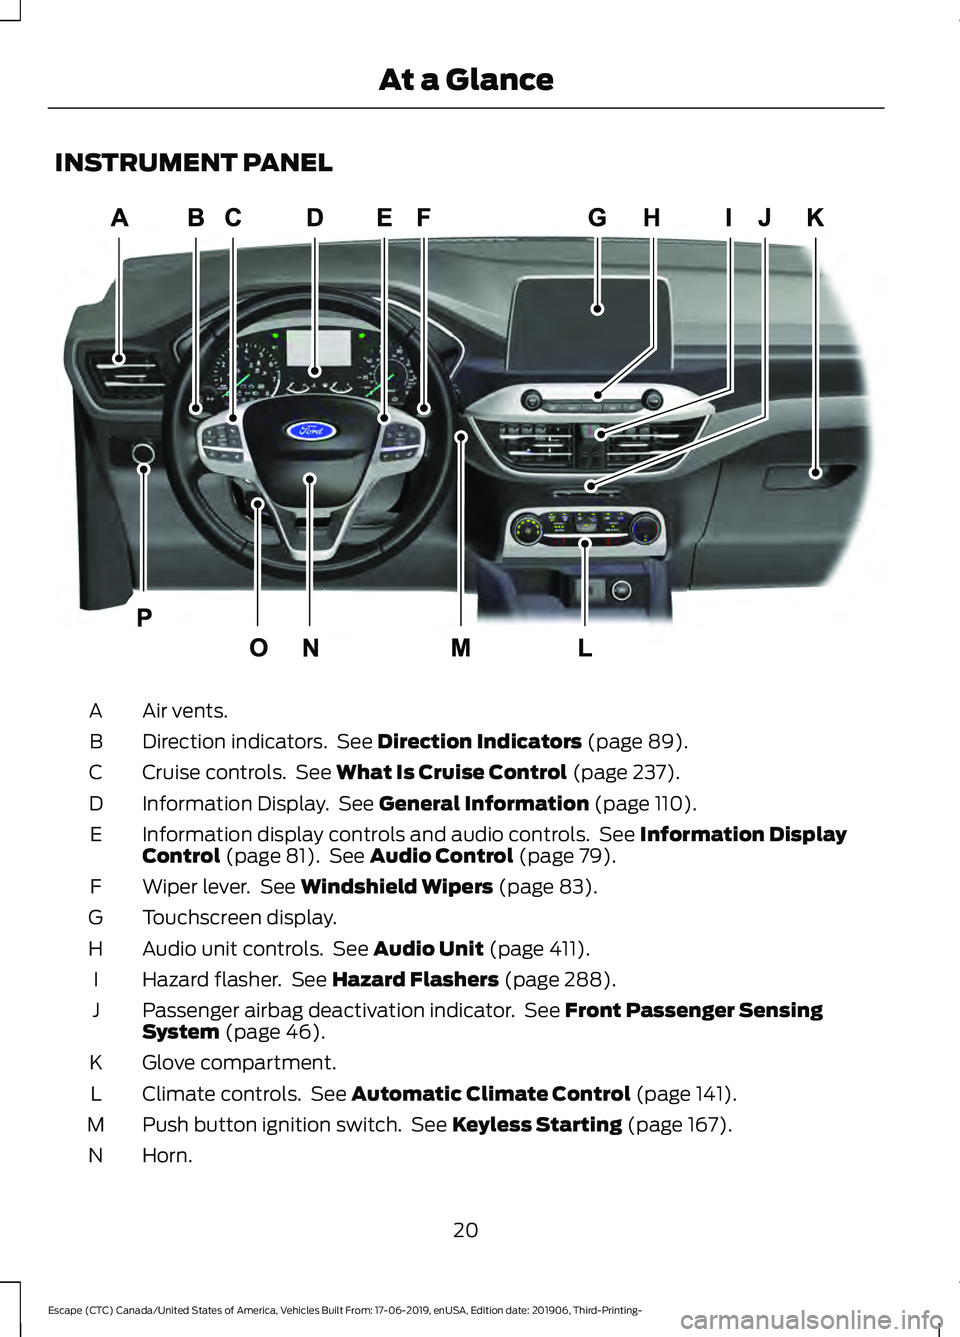 FORD ESCAPE 2020  Owners Manual INSTRUMENT PANEL
Air vents.
A
Direction indicators.  See Direction Indicators (page 89).
B
Cruise controls.  See 
What Is Cruise Control (page 237).
C
Information Display.  See 
General Information (p